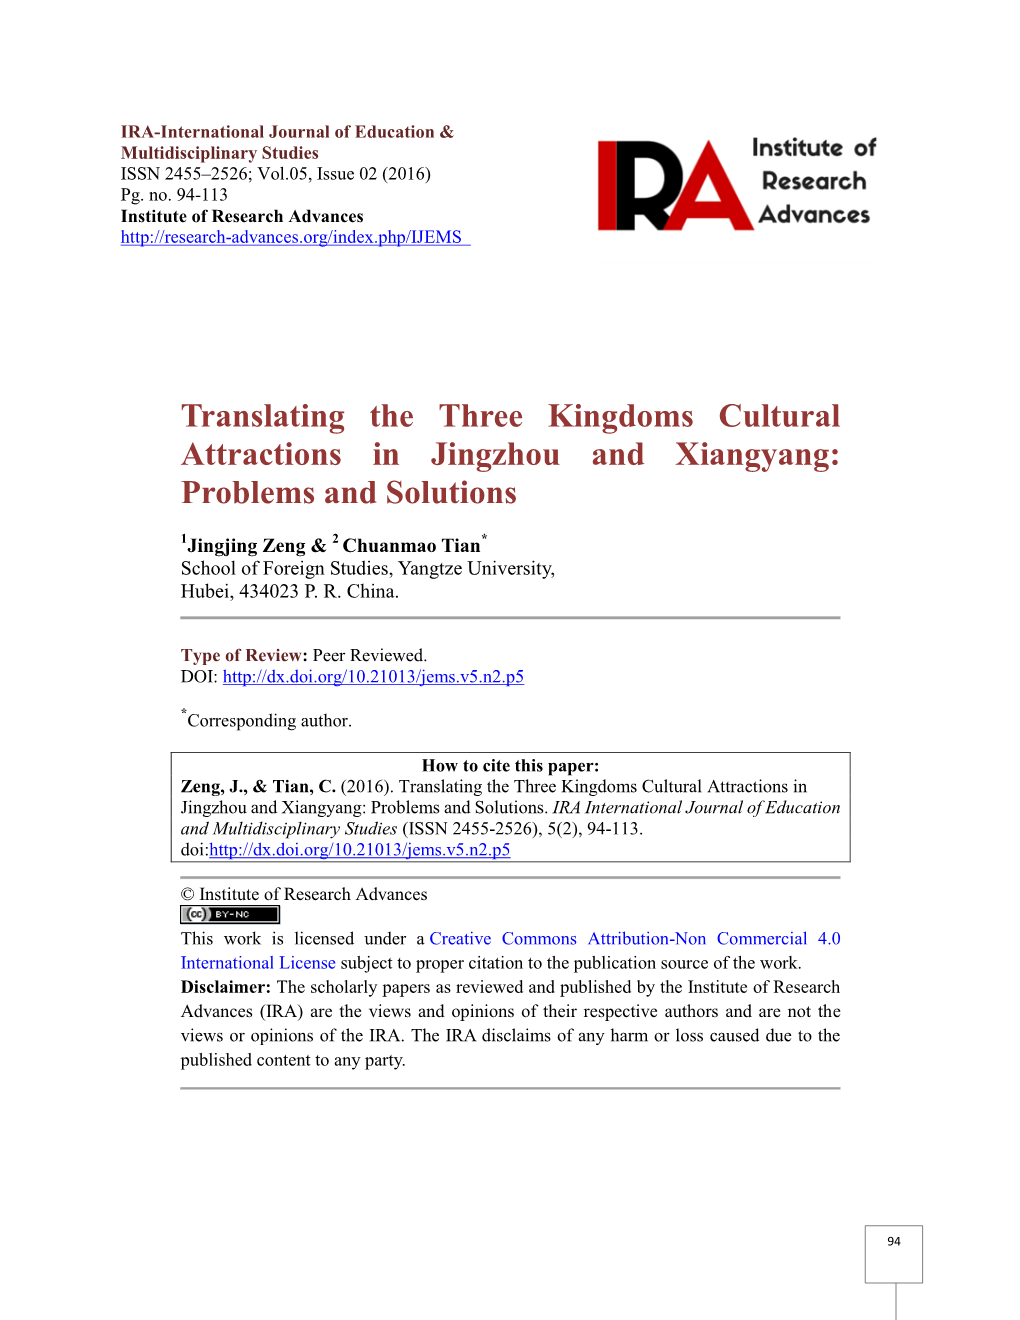 Translating the Three Kingdoms Cultural Attractions in Jingzhou and Xiangyang: Problems and Solutions